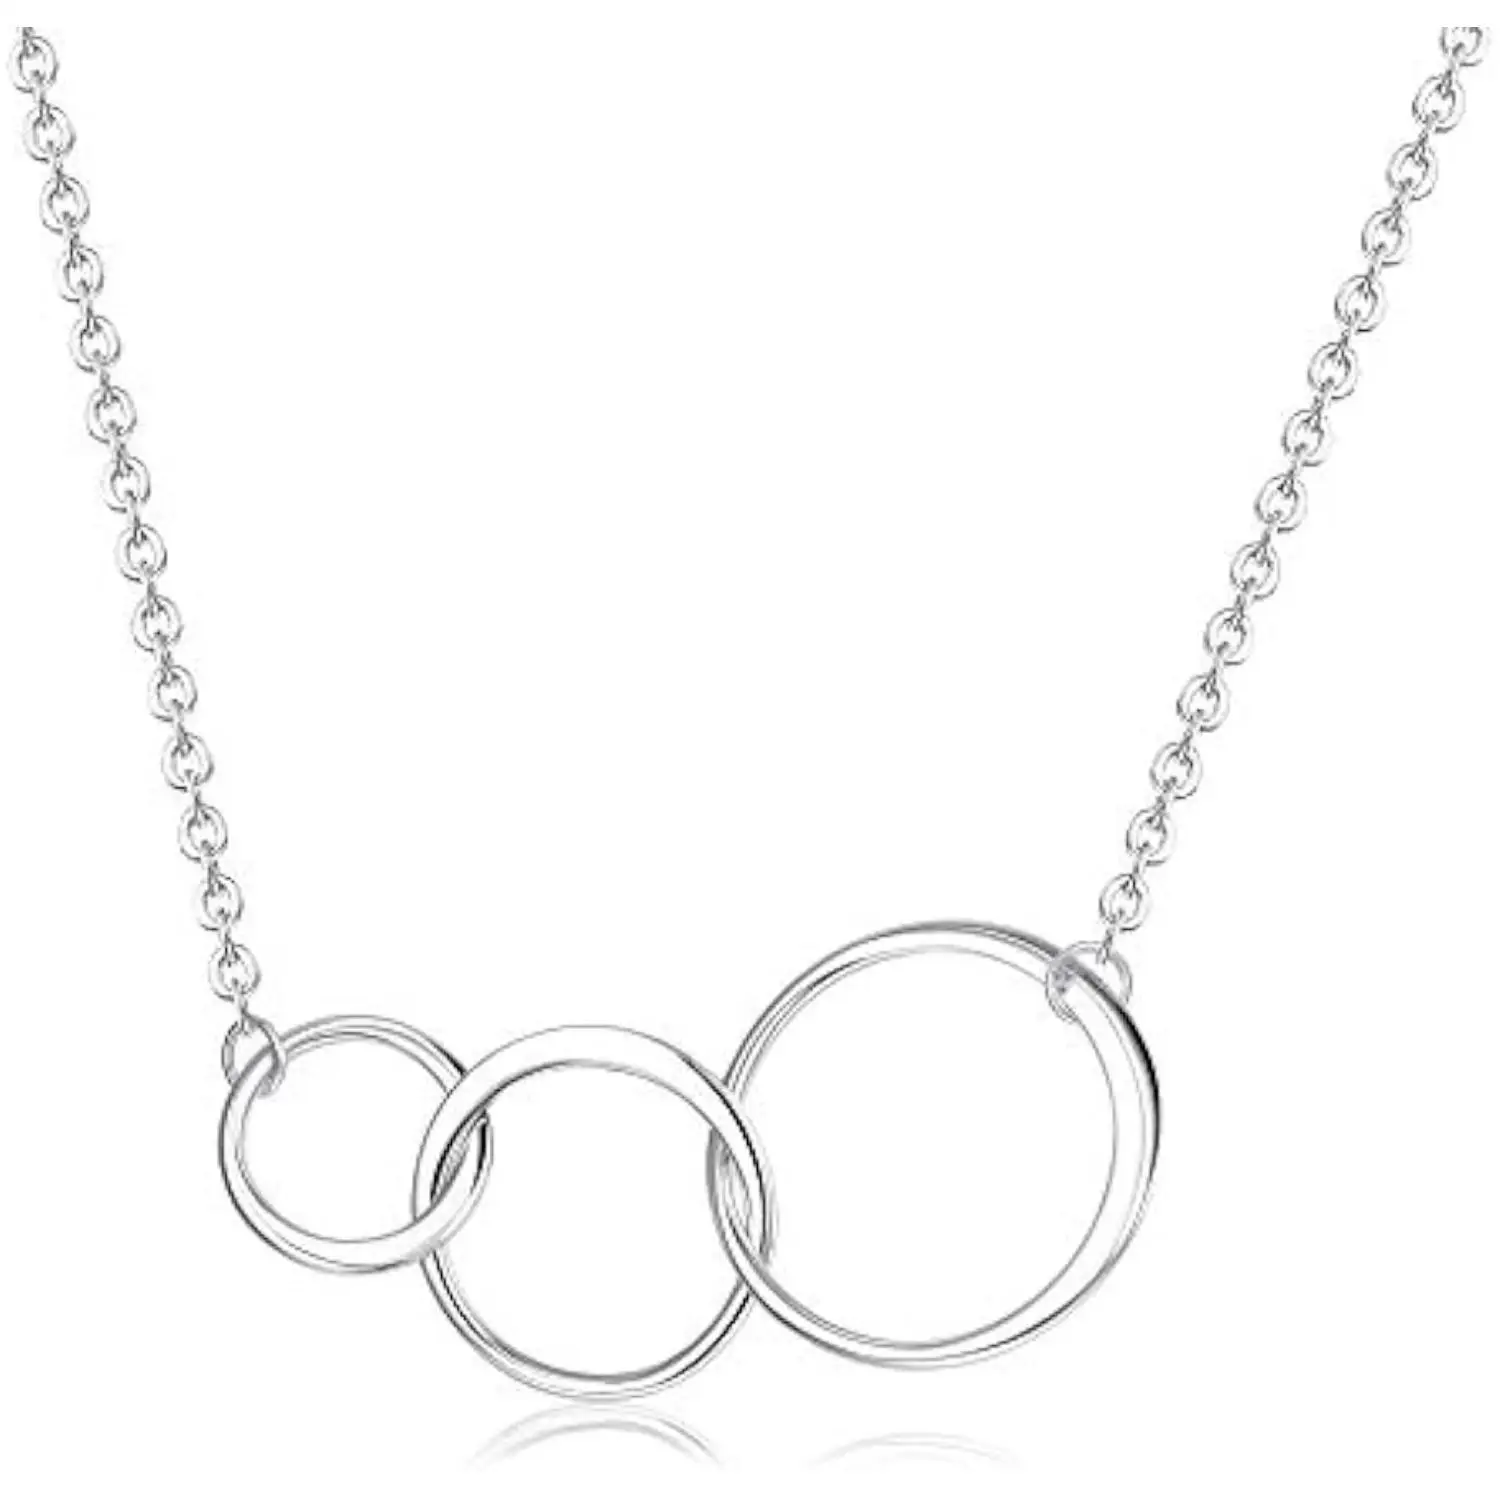 

Fansilver 925 Sterling Silver Necklace for Grandma Mom Daughter Infinity Circle Pendant Necklace Mother Birthday Graduation Gift